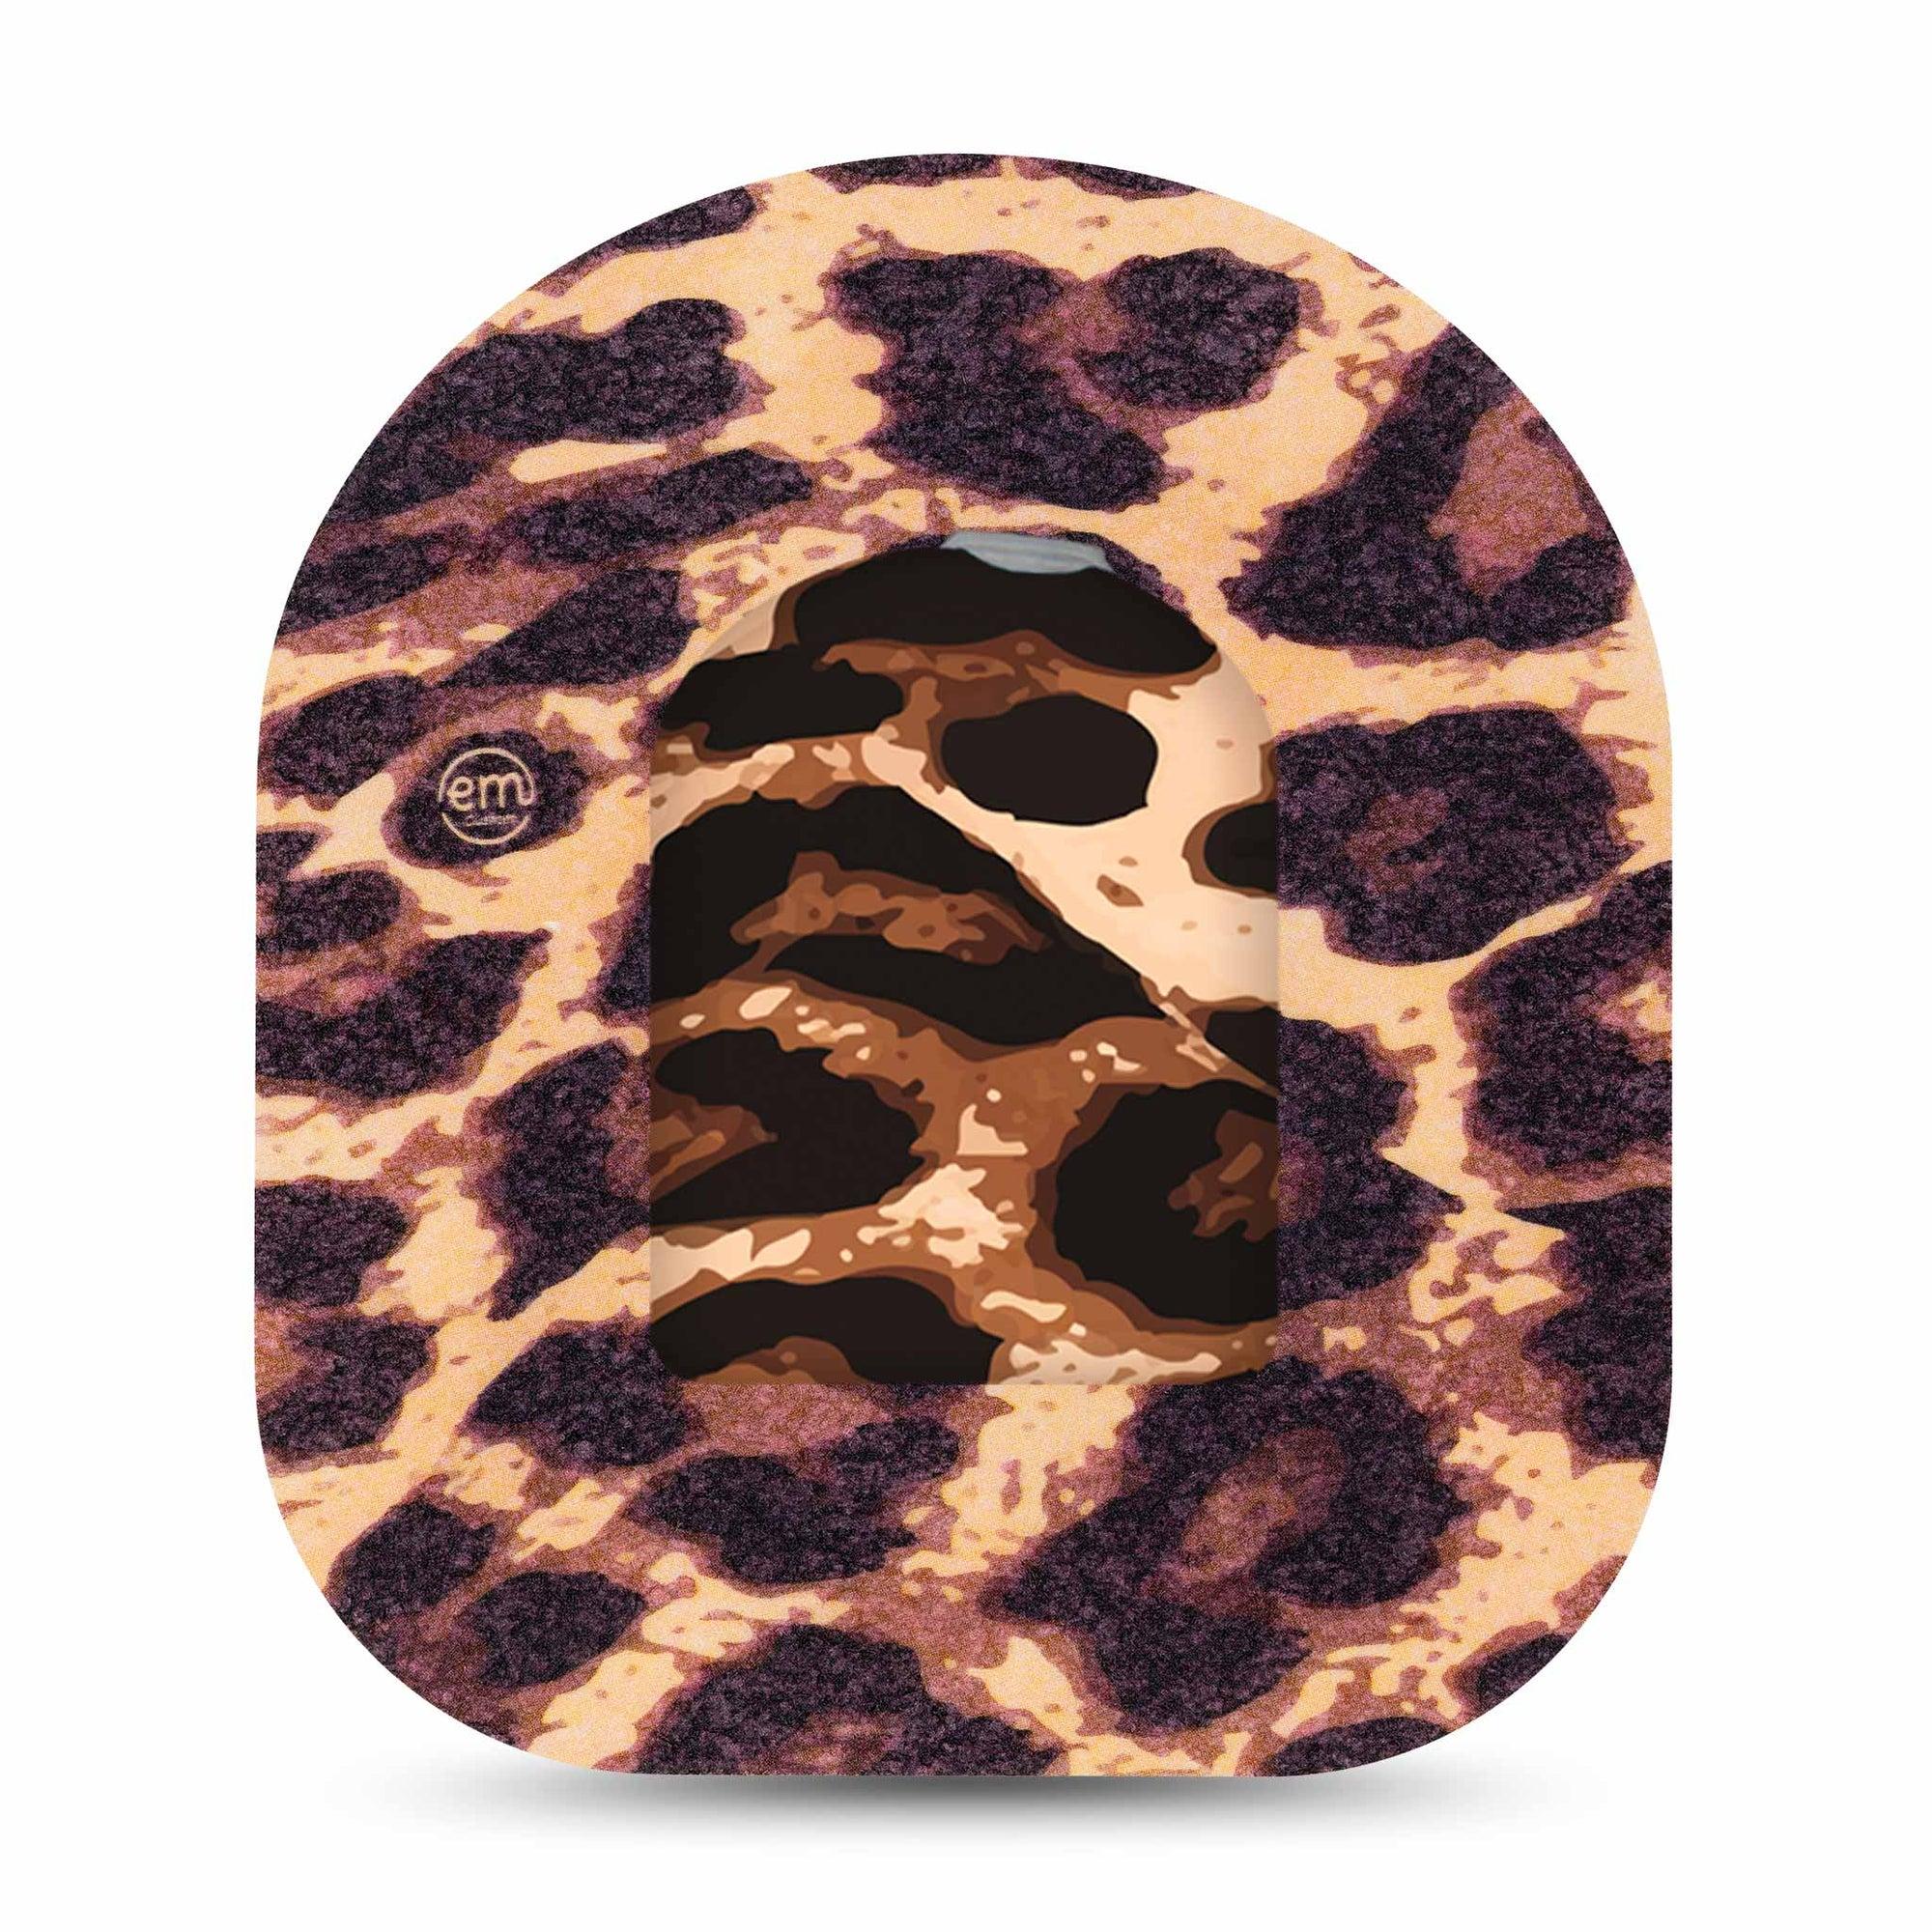 ExpressionMed Leopard Pod Full Wrap Sticker Single with Matching Omnipod Patch Sticker Leopard Print Vinyl Graphics Pump design